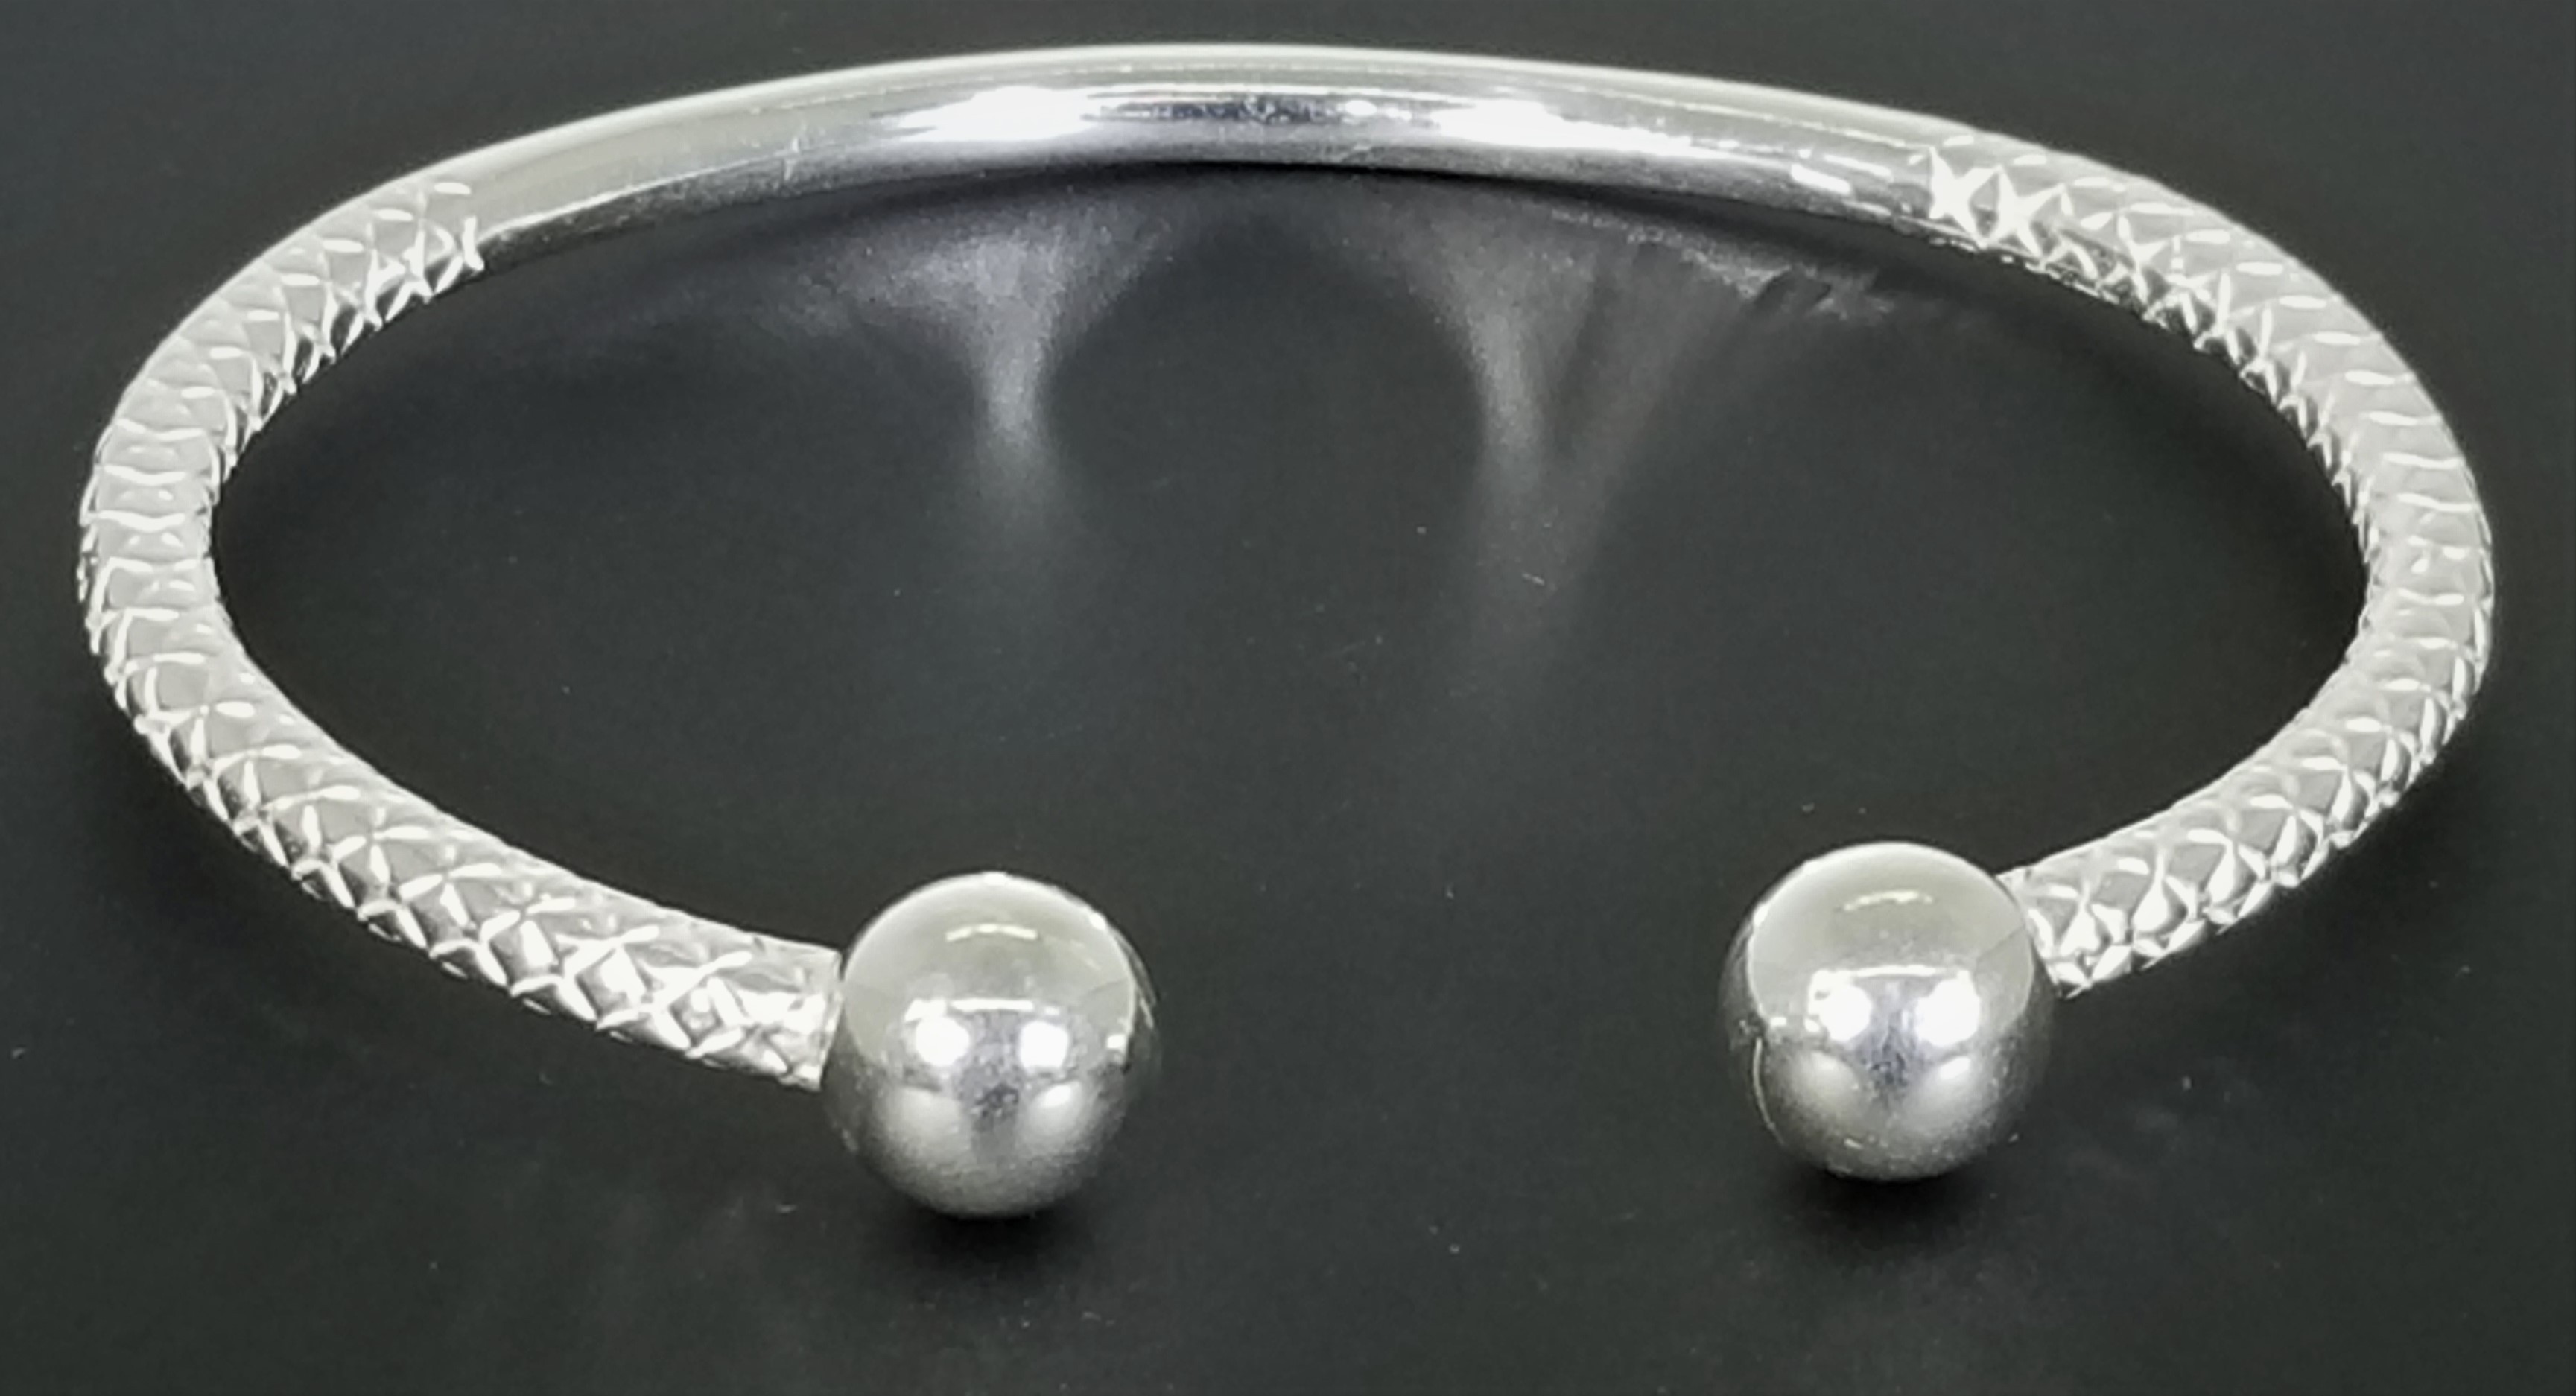 925 Sterling Silver West Indian Bangles